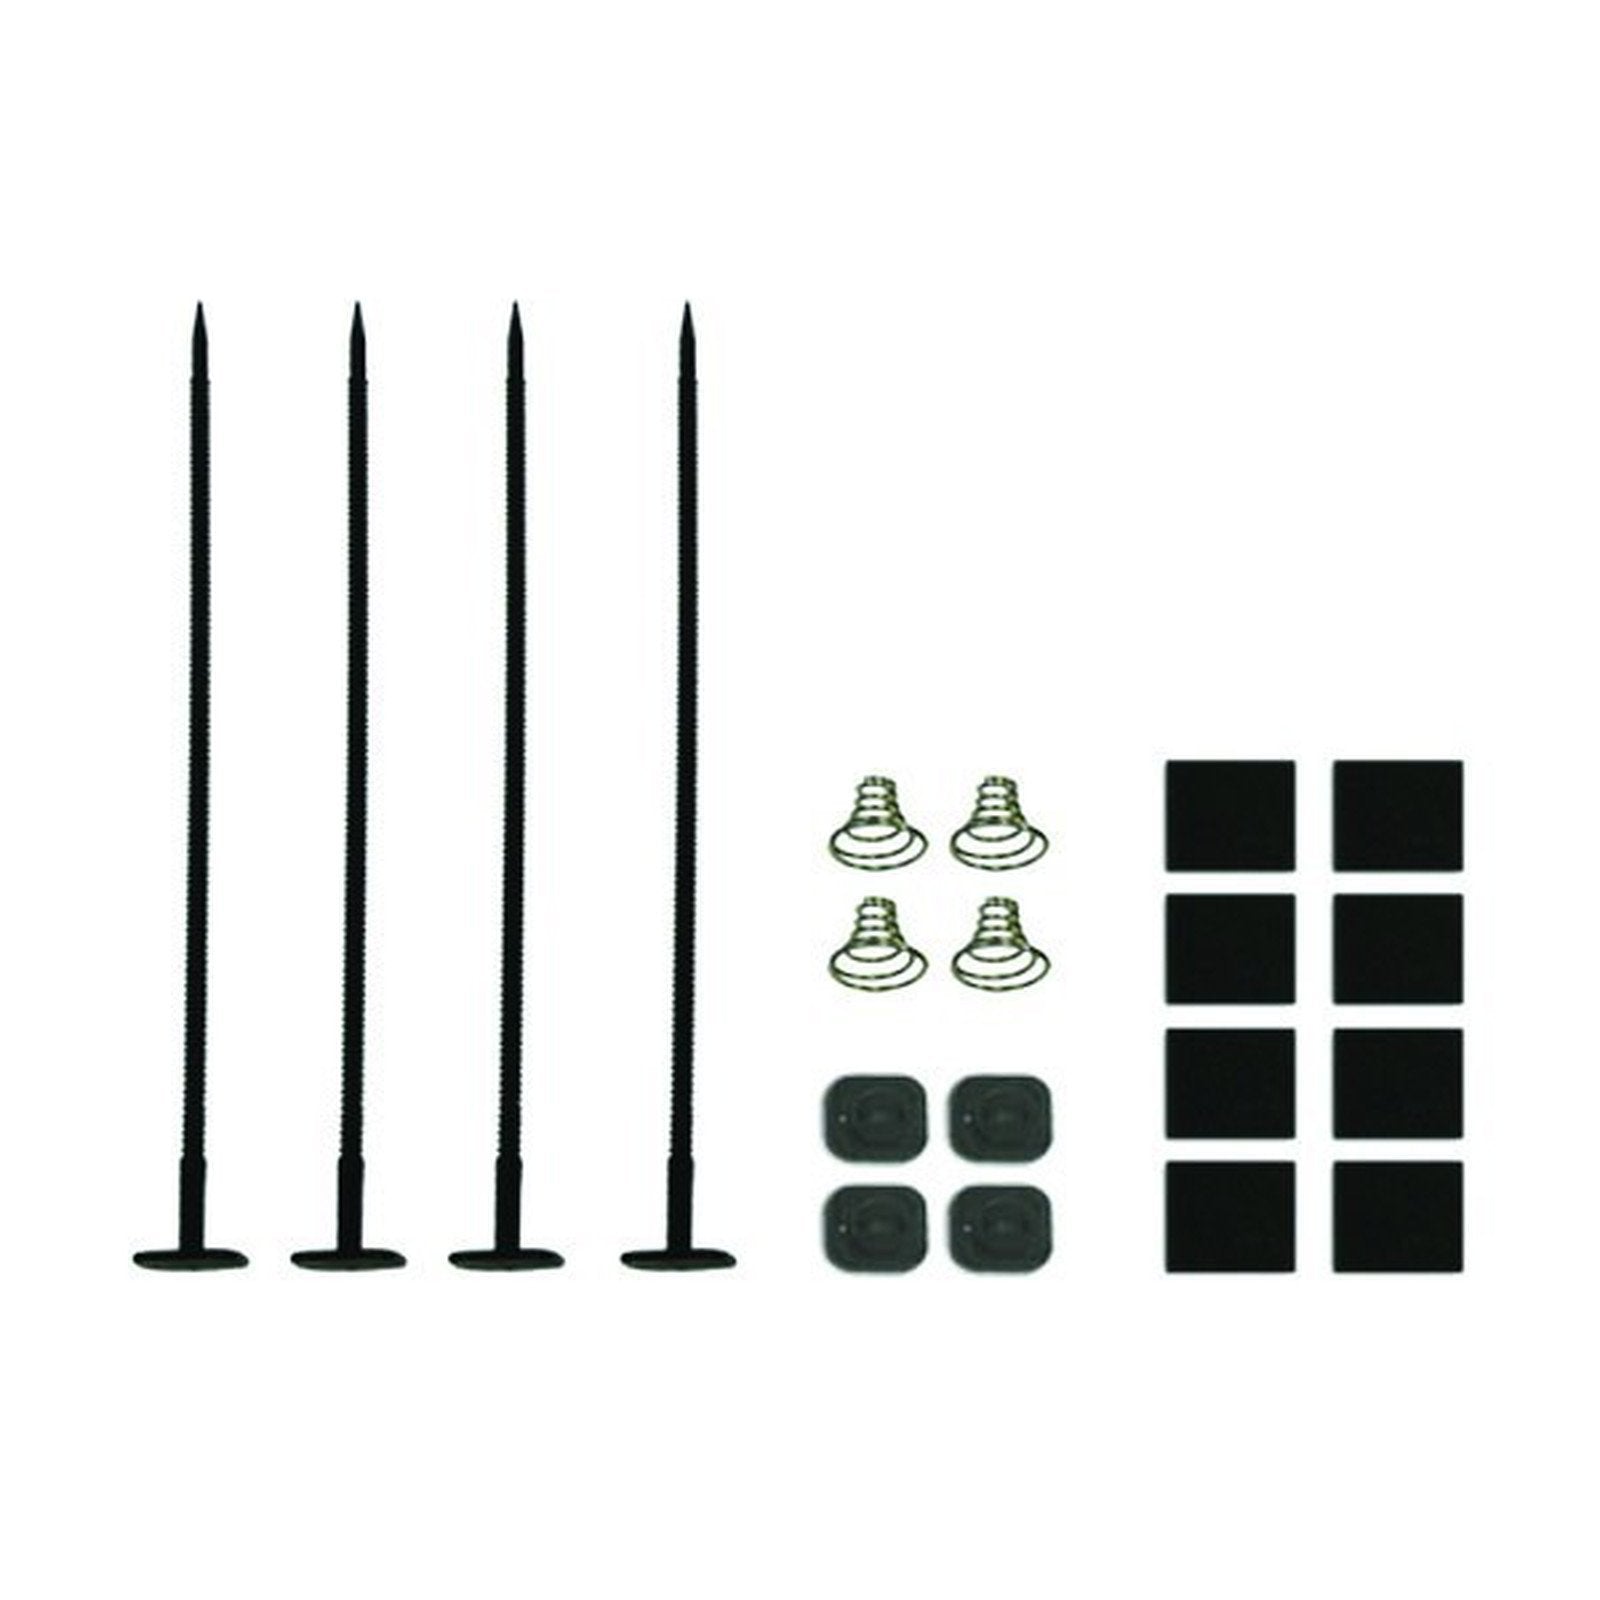 MISHIMOTO universal mounting kit for electronic fans - PARTS33 GmbH